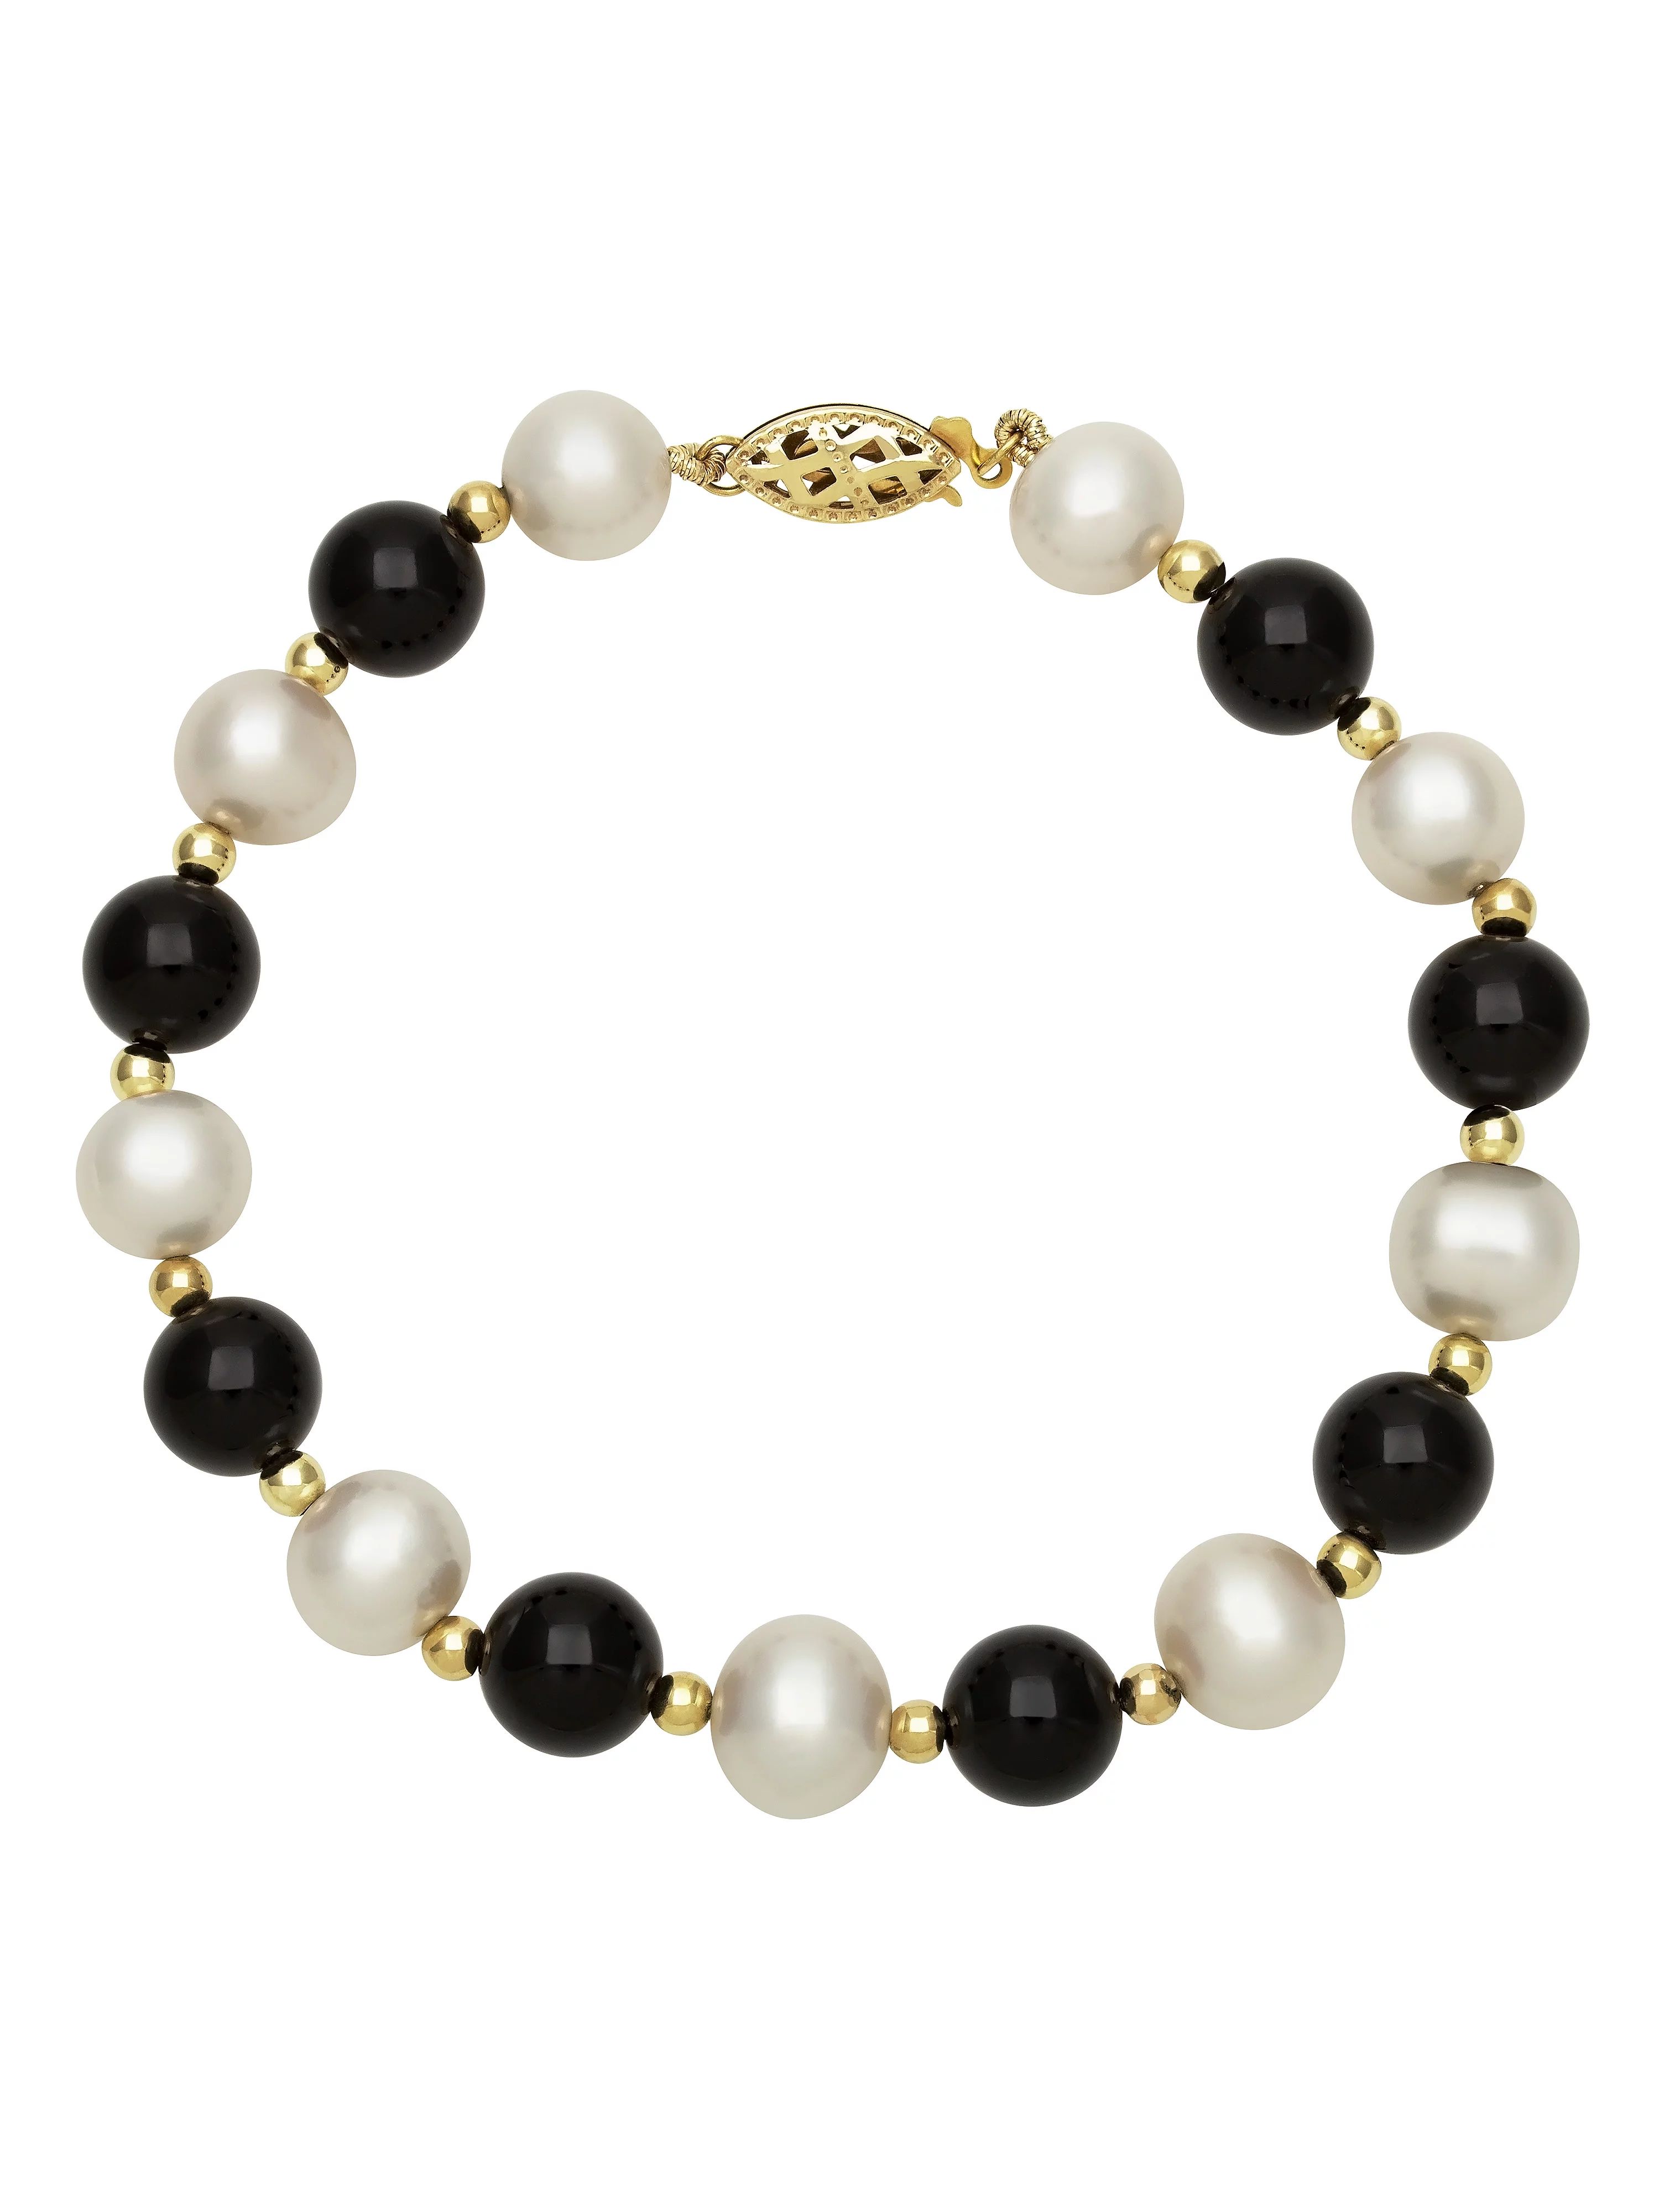 Cultured White Freshwater Pearl and Black Onyx 14K Yellow Gold Bracelet, 7.5" | Walmart (US)